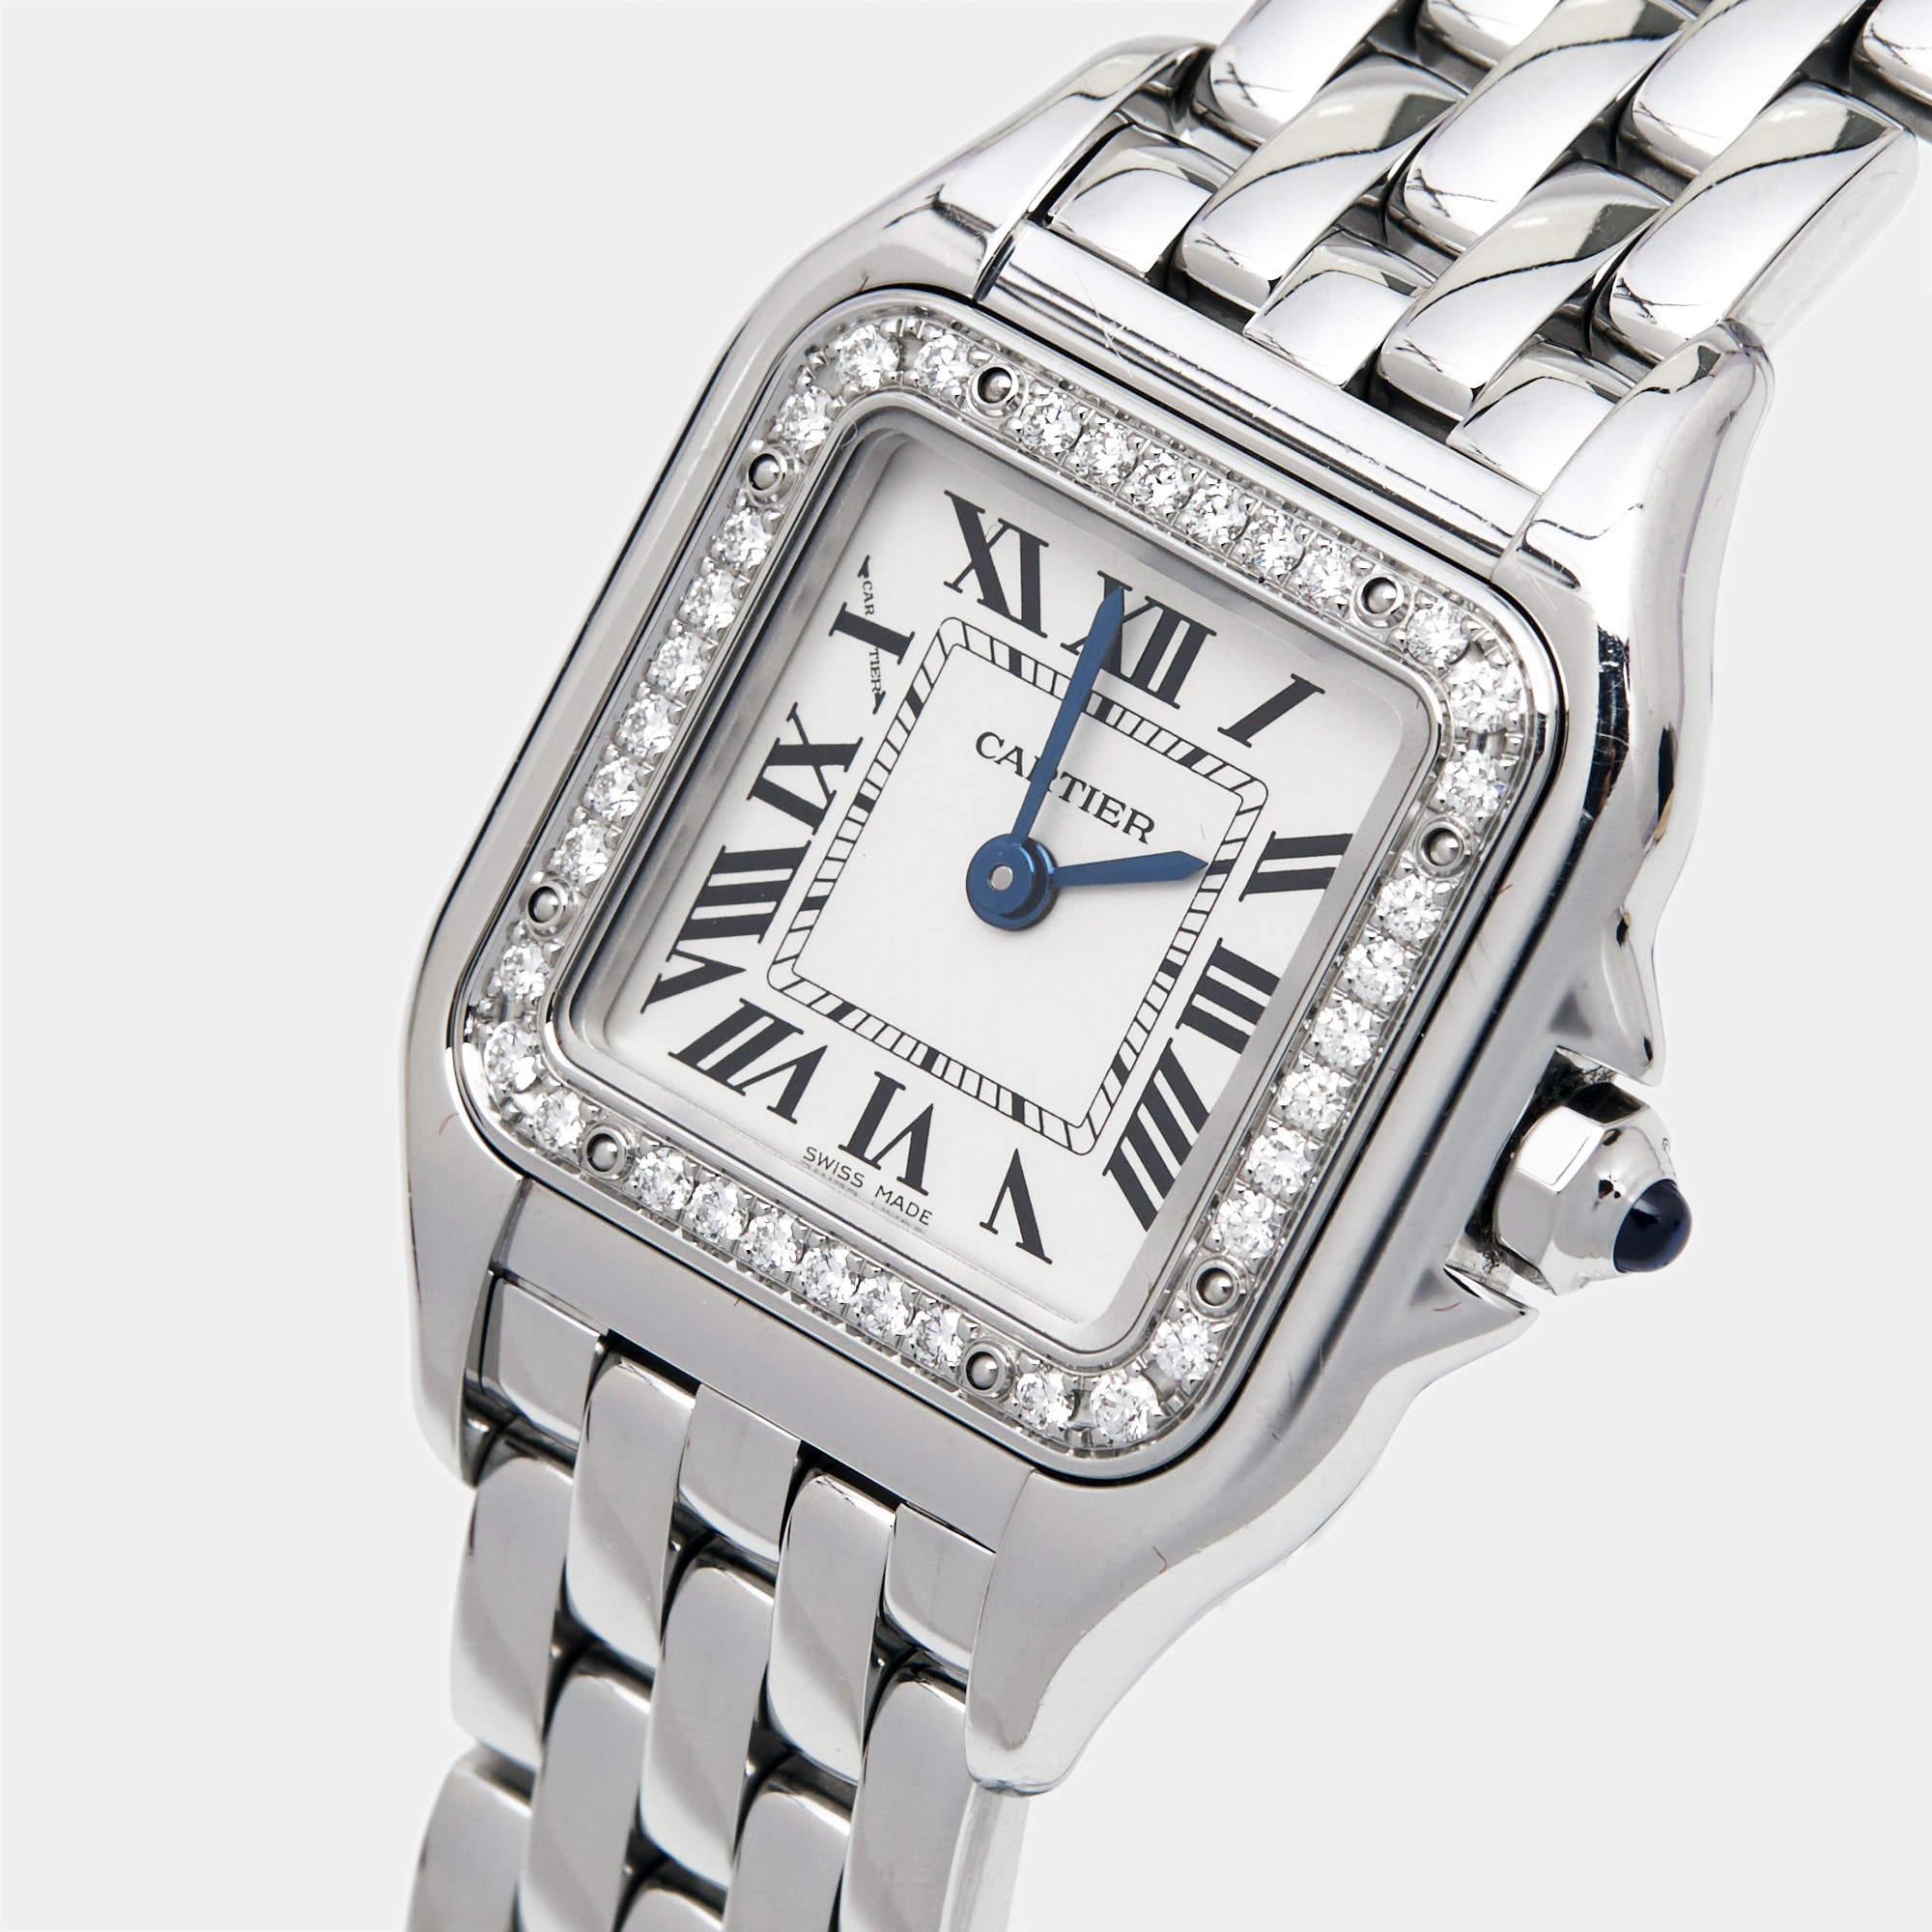 This Panthère from Cartier is a creation worthy of being yours. As a true style icon, It has a grand fusion of elegance with contemporary charm in every detail, from the square case to the concealed clasp. Using stainless steel, Cartier sculpted out